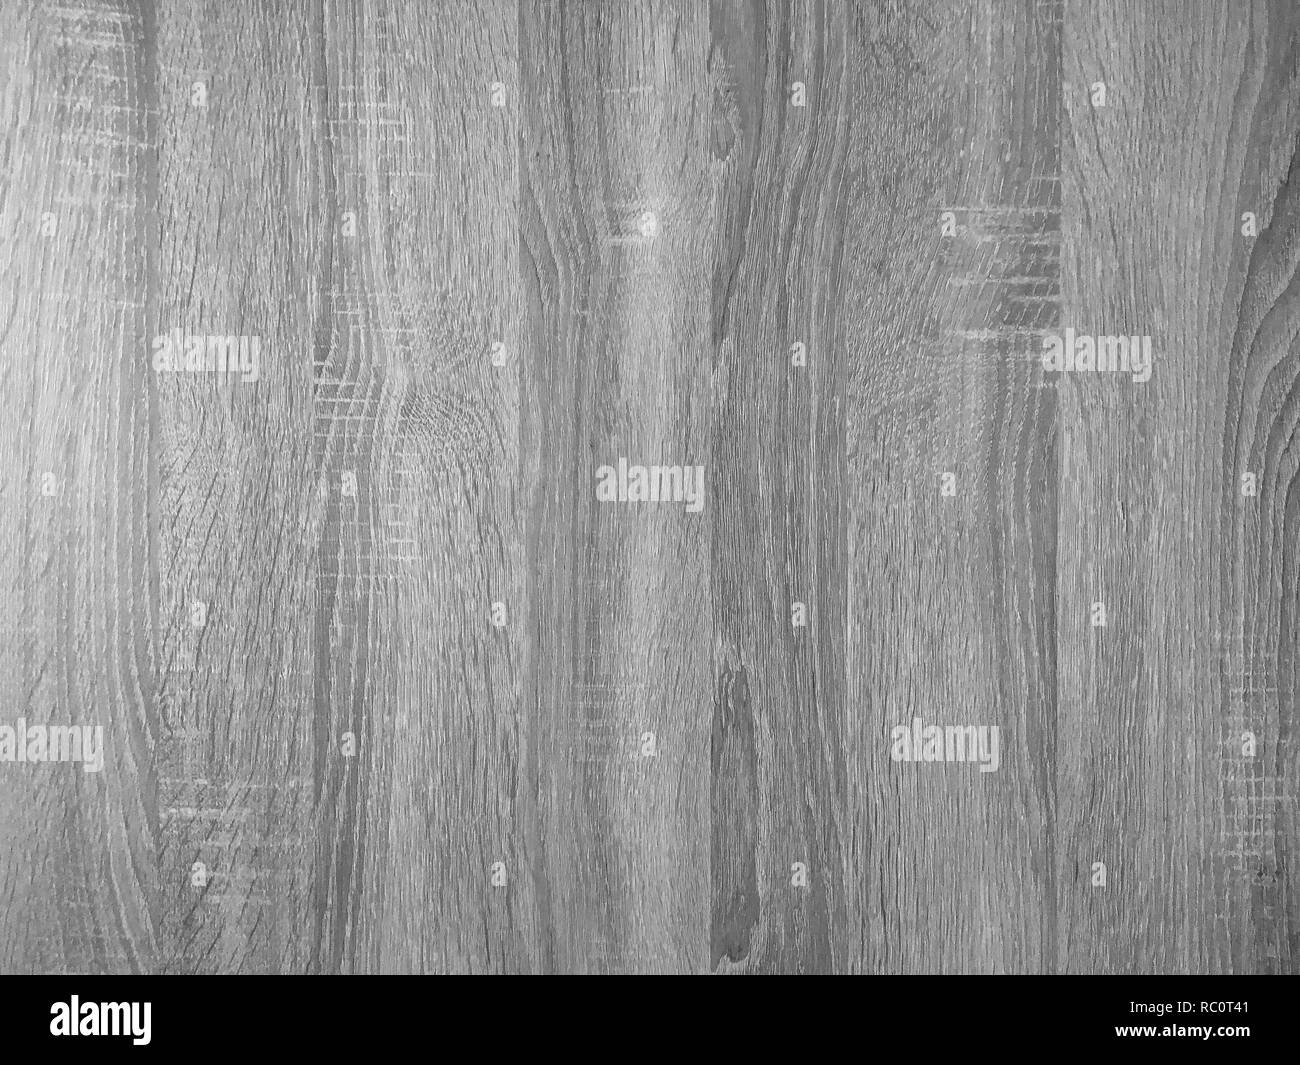 brown wooden texture background, dark oak of weathered distressed washed wood with faded varnish paint showing woodgrain texture. wash hardwood planks Stock Photo